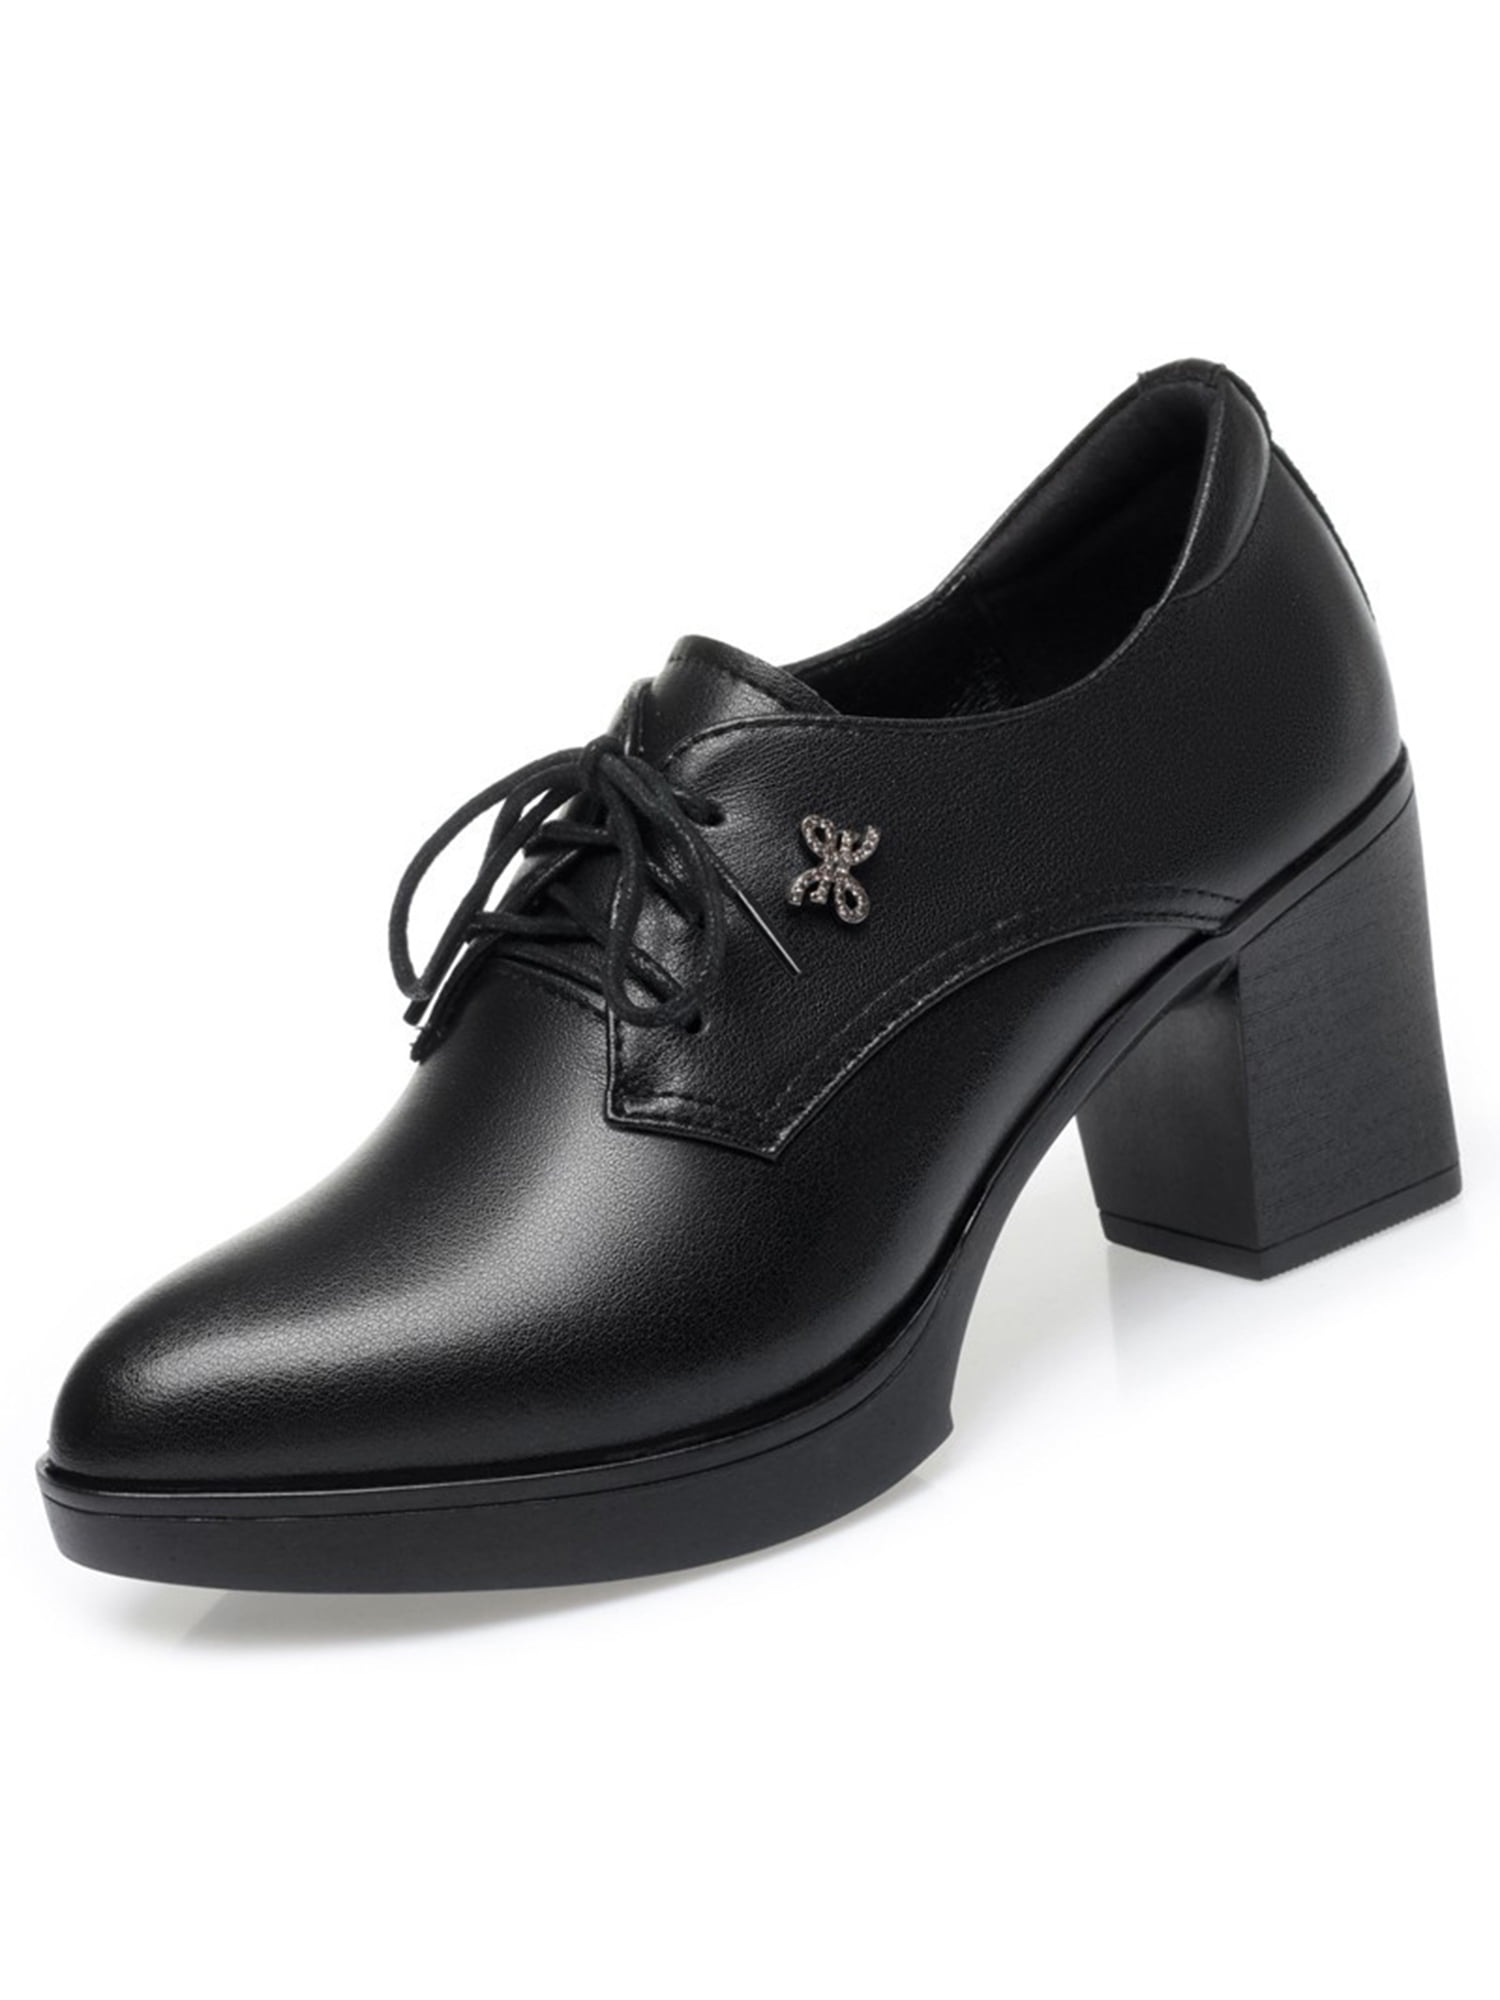 womens leather dress shoes